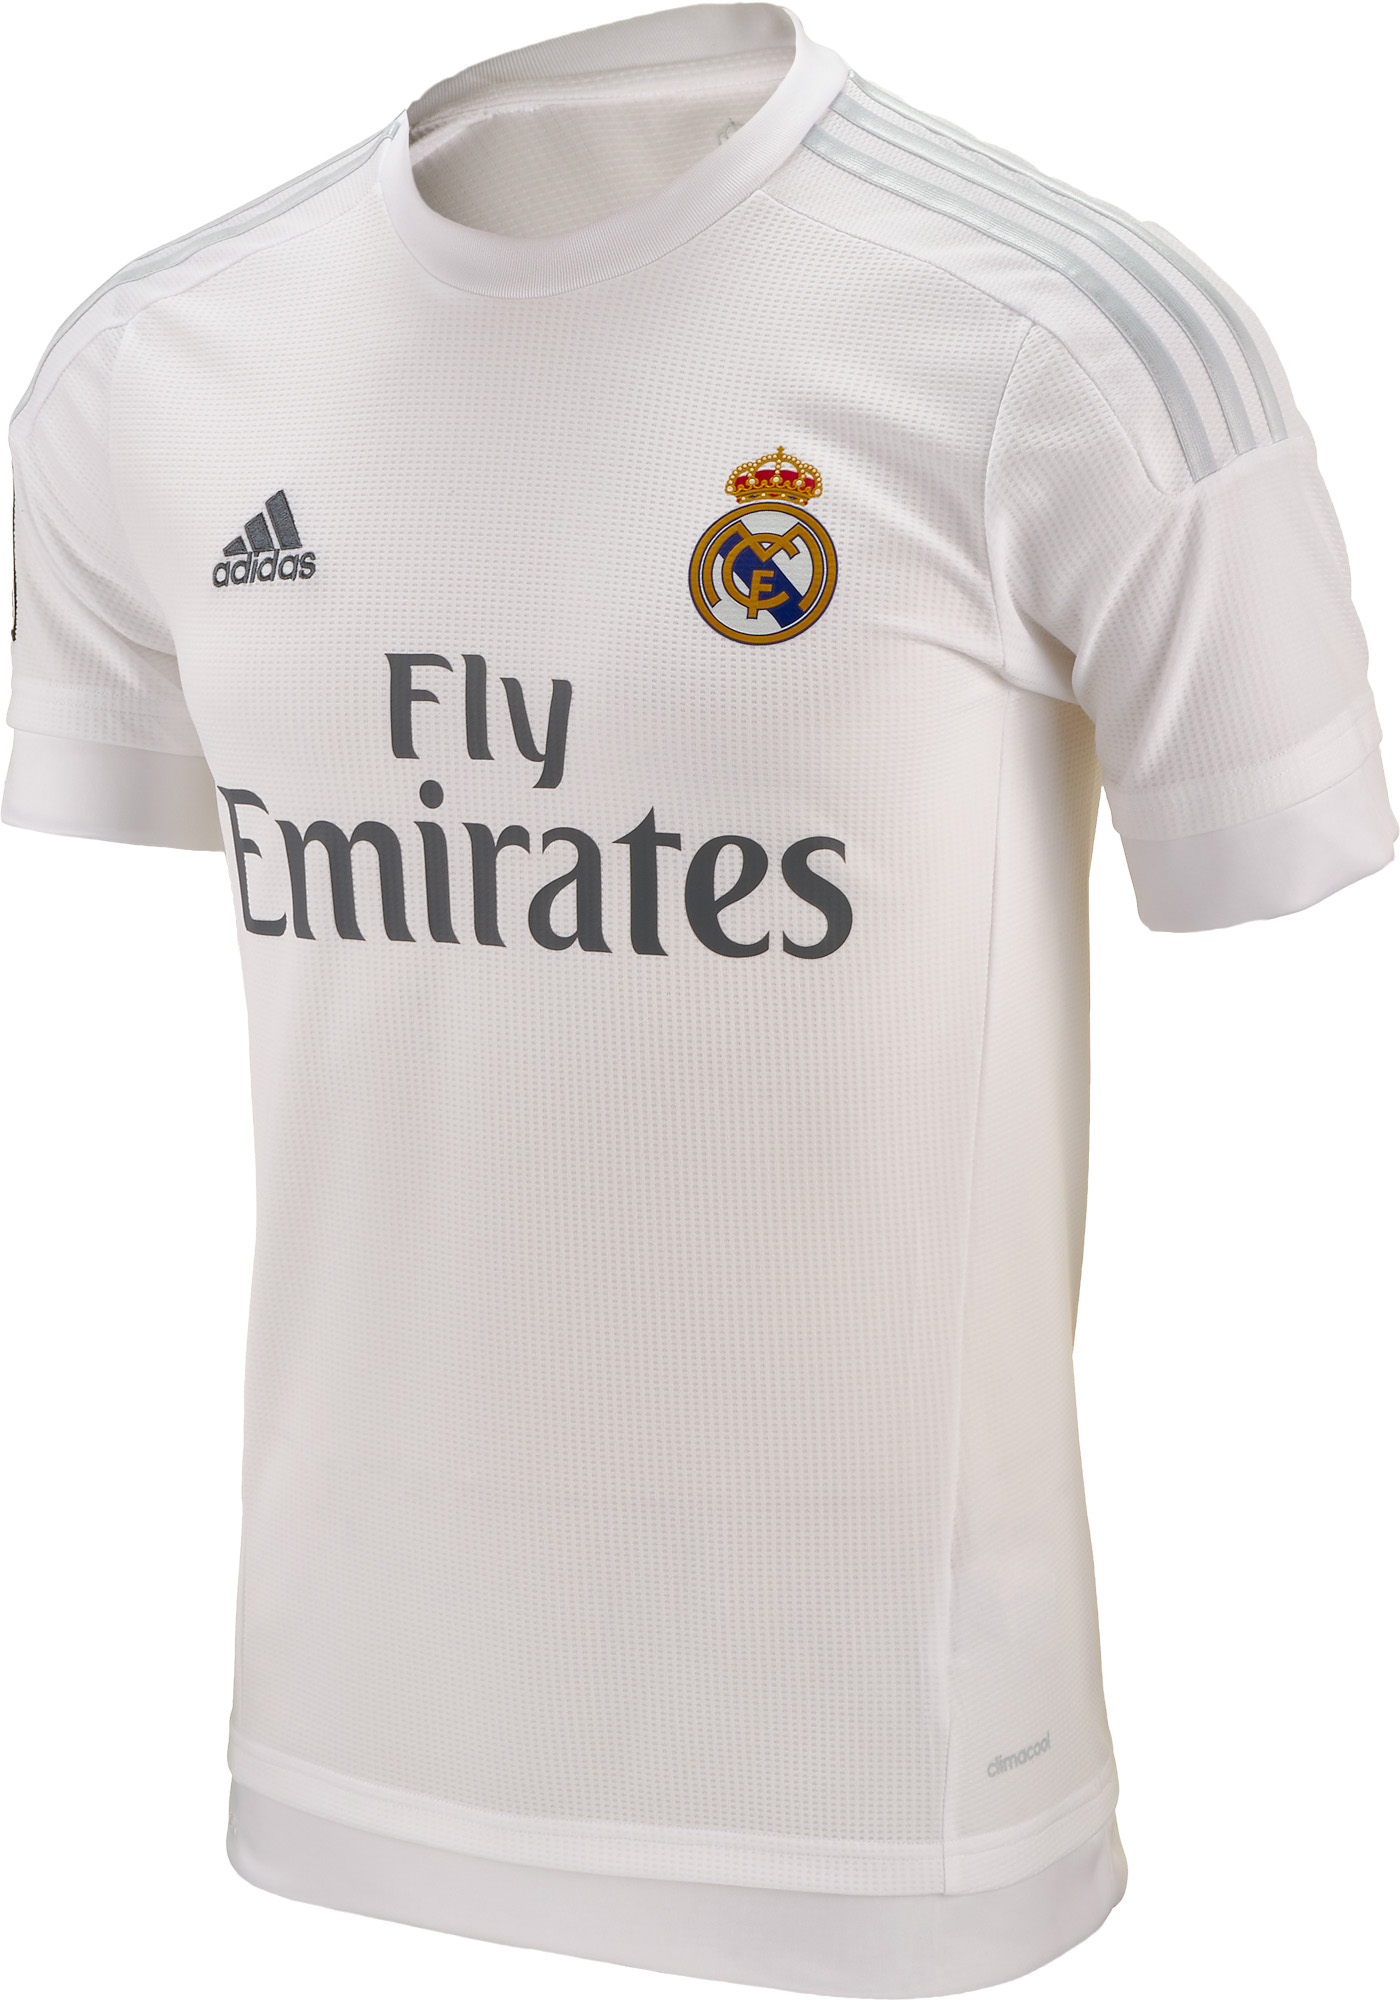 adidas Men's Real Madrid 15/16 Champions Home Jersey White/Clear